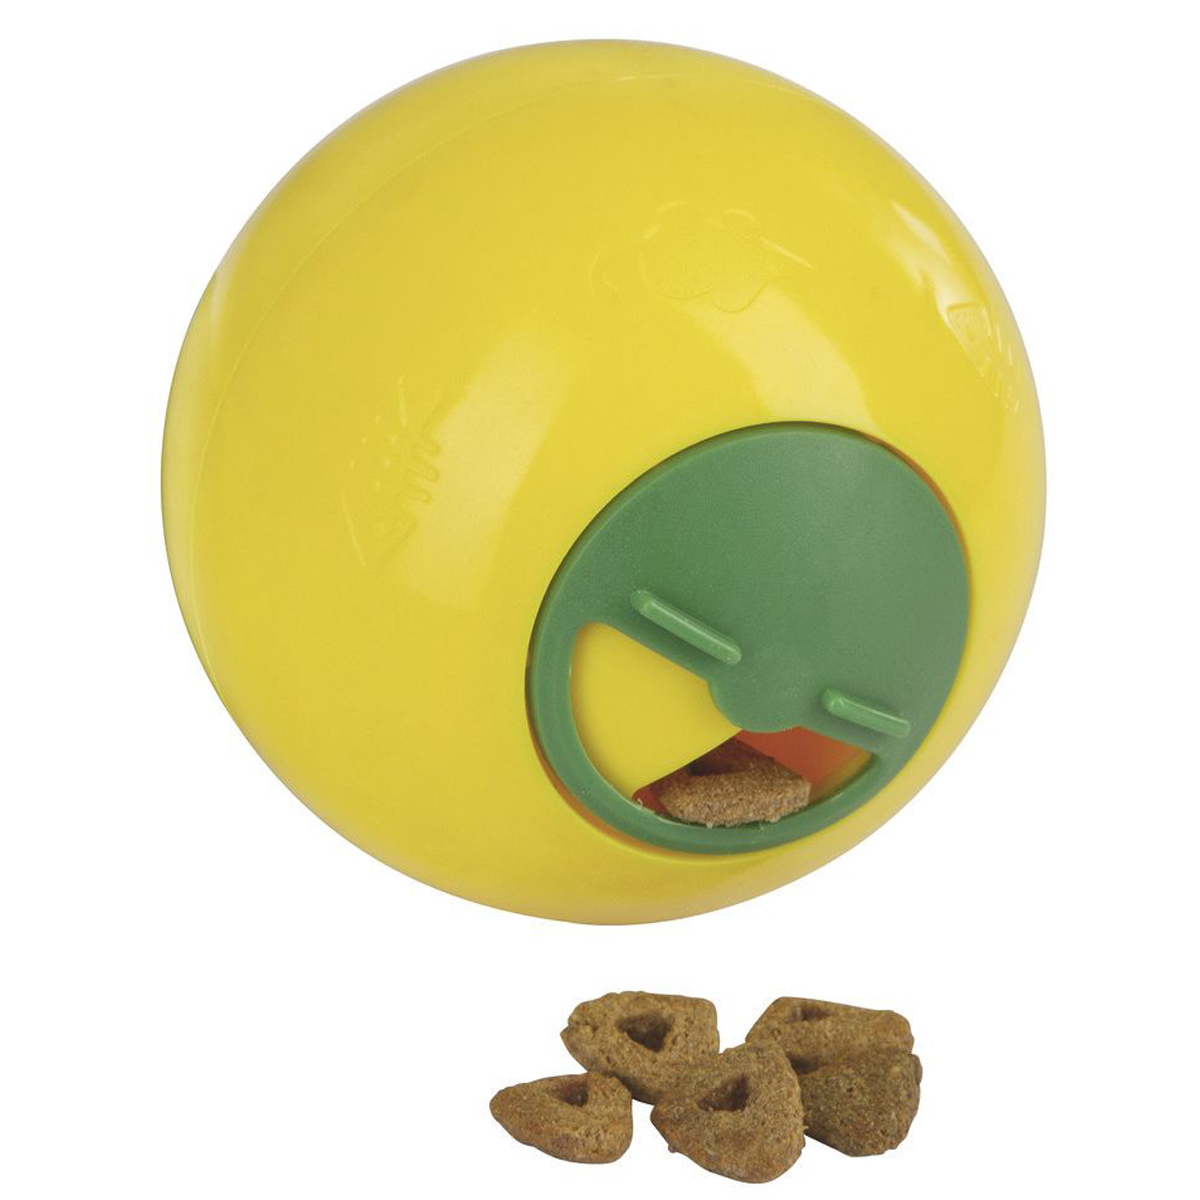 Snack ball for cats and chickens